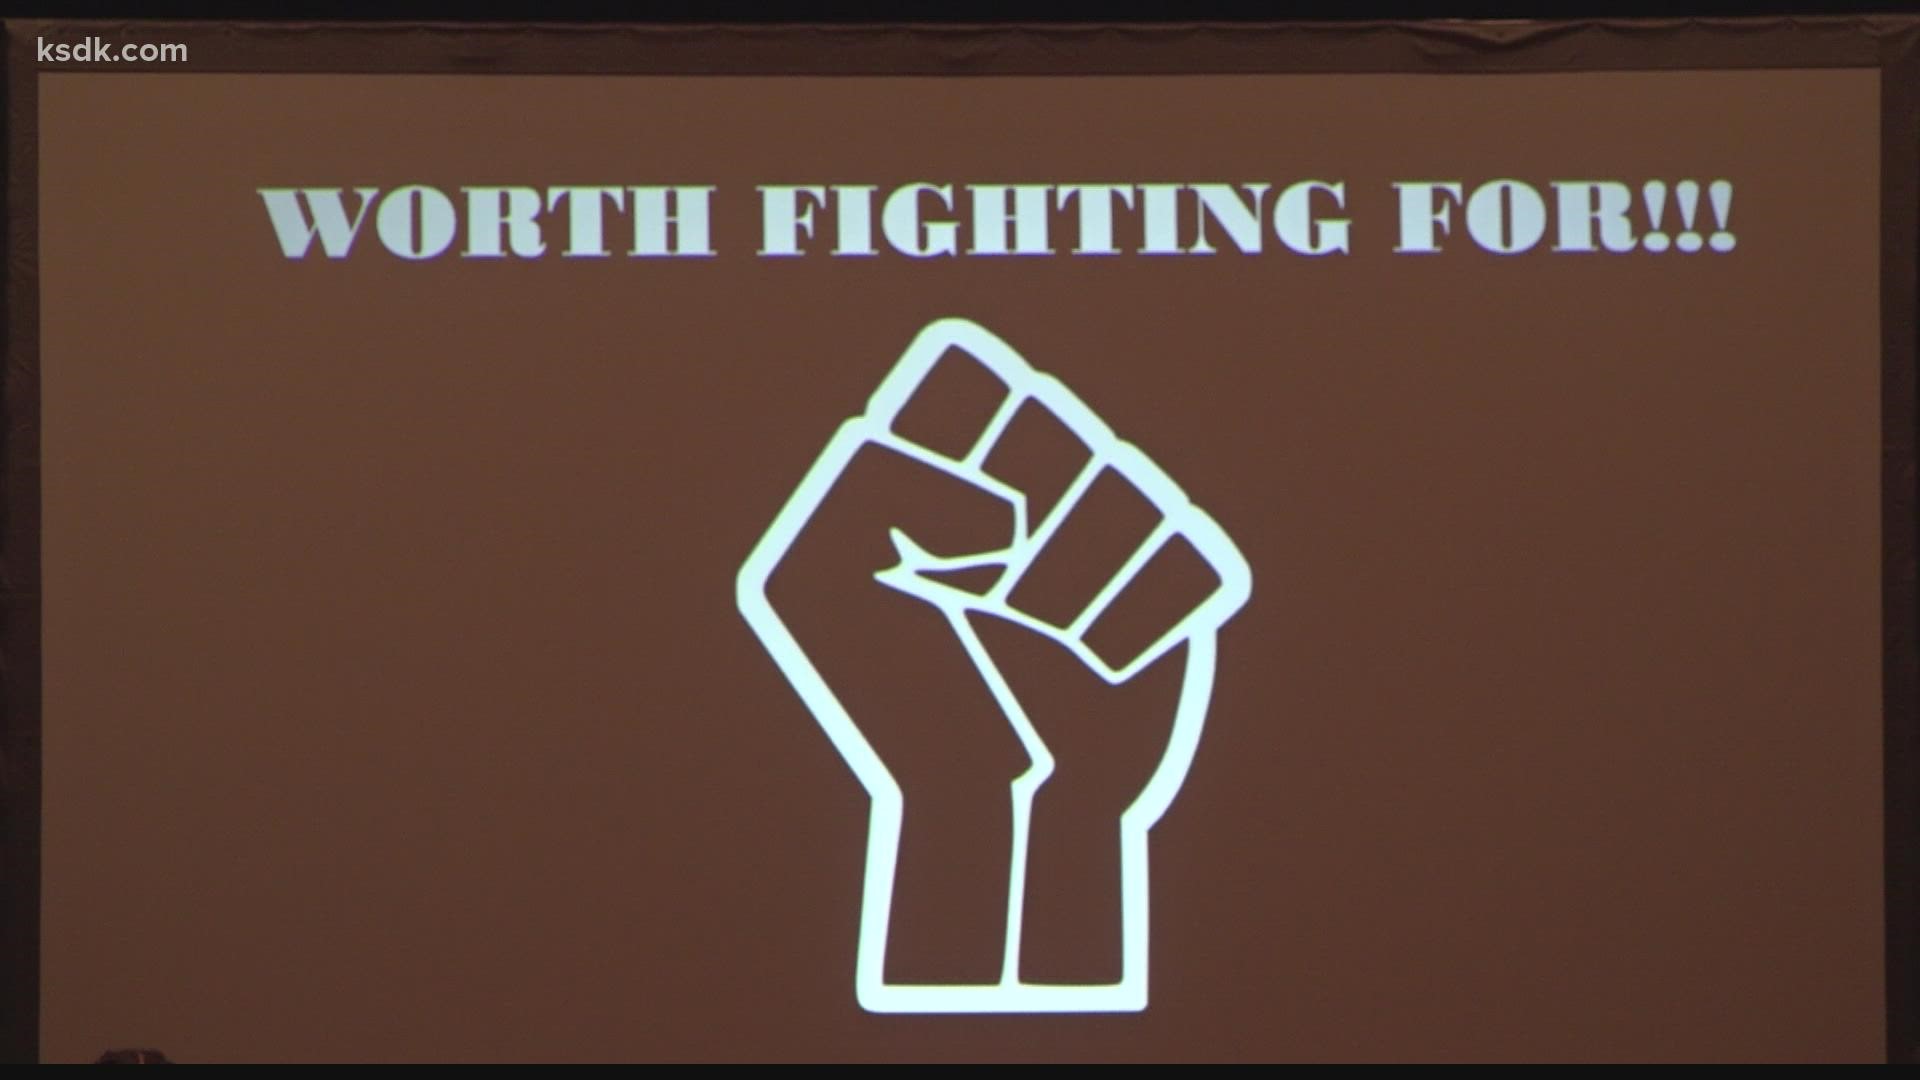 The 'Worth Fighting For' production is an adaptation of the school's reality. Students are raising awareness to keep the historic school from closing.